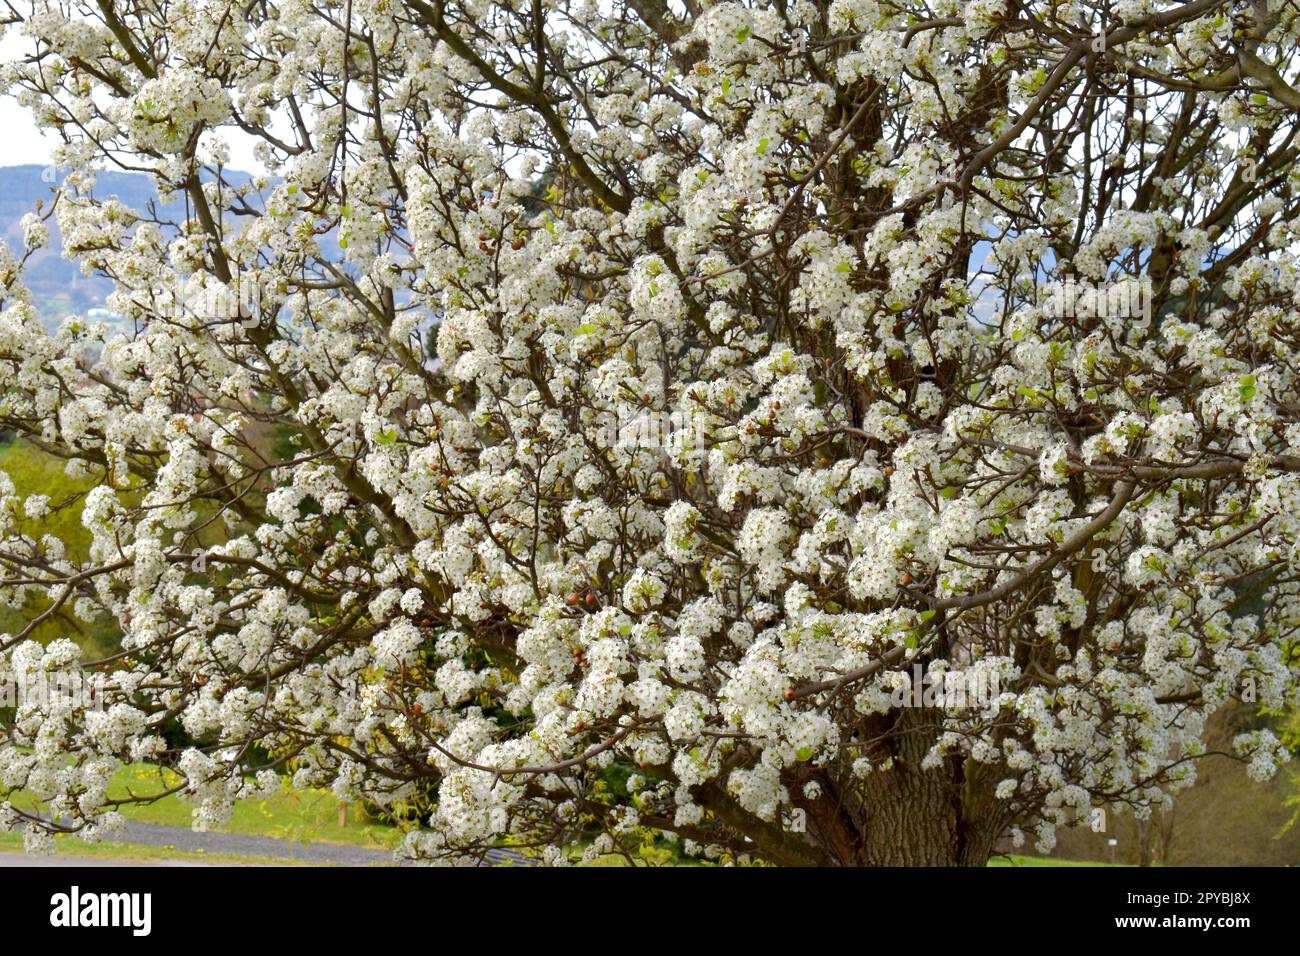 Detail of the flowers of Callery pear (Pyrus calleryana). It is an endemic species of China and Vietnam. Stock Photo